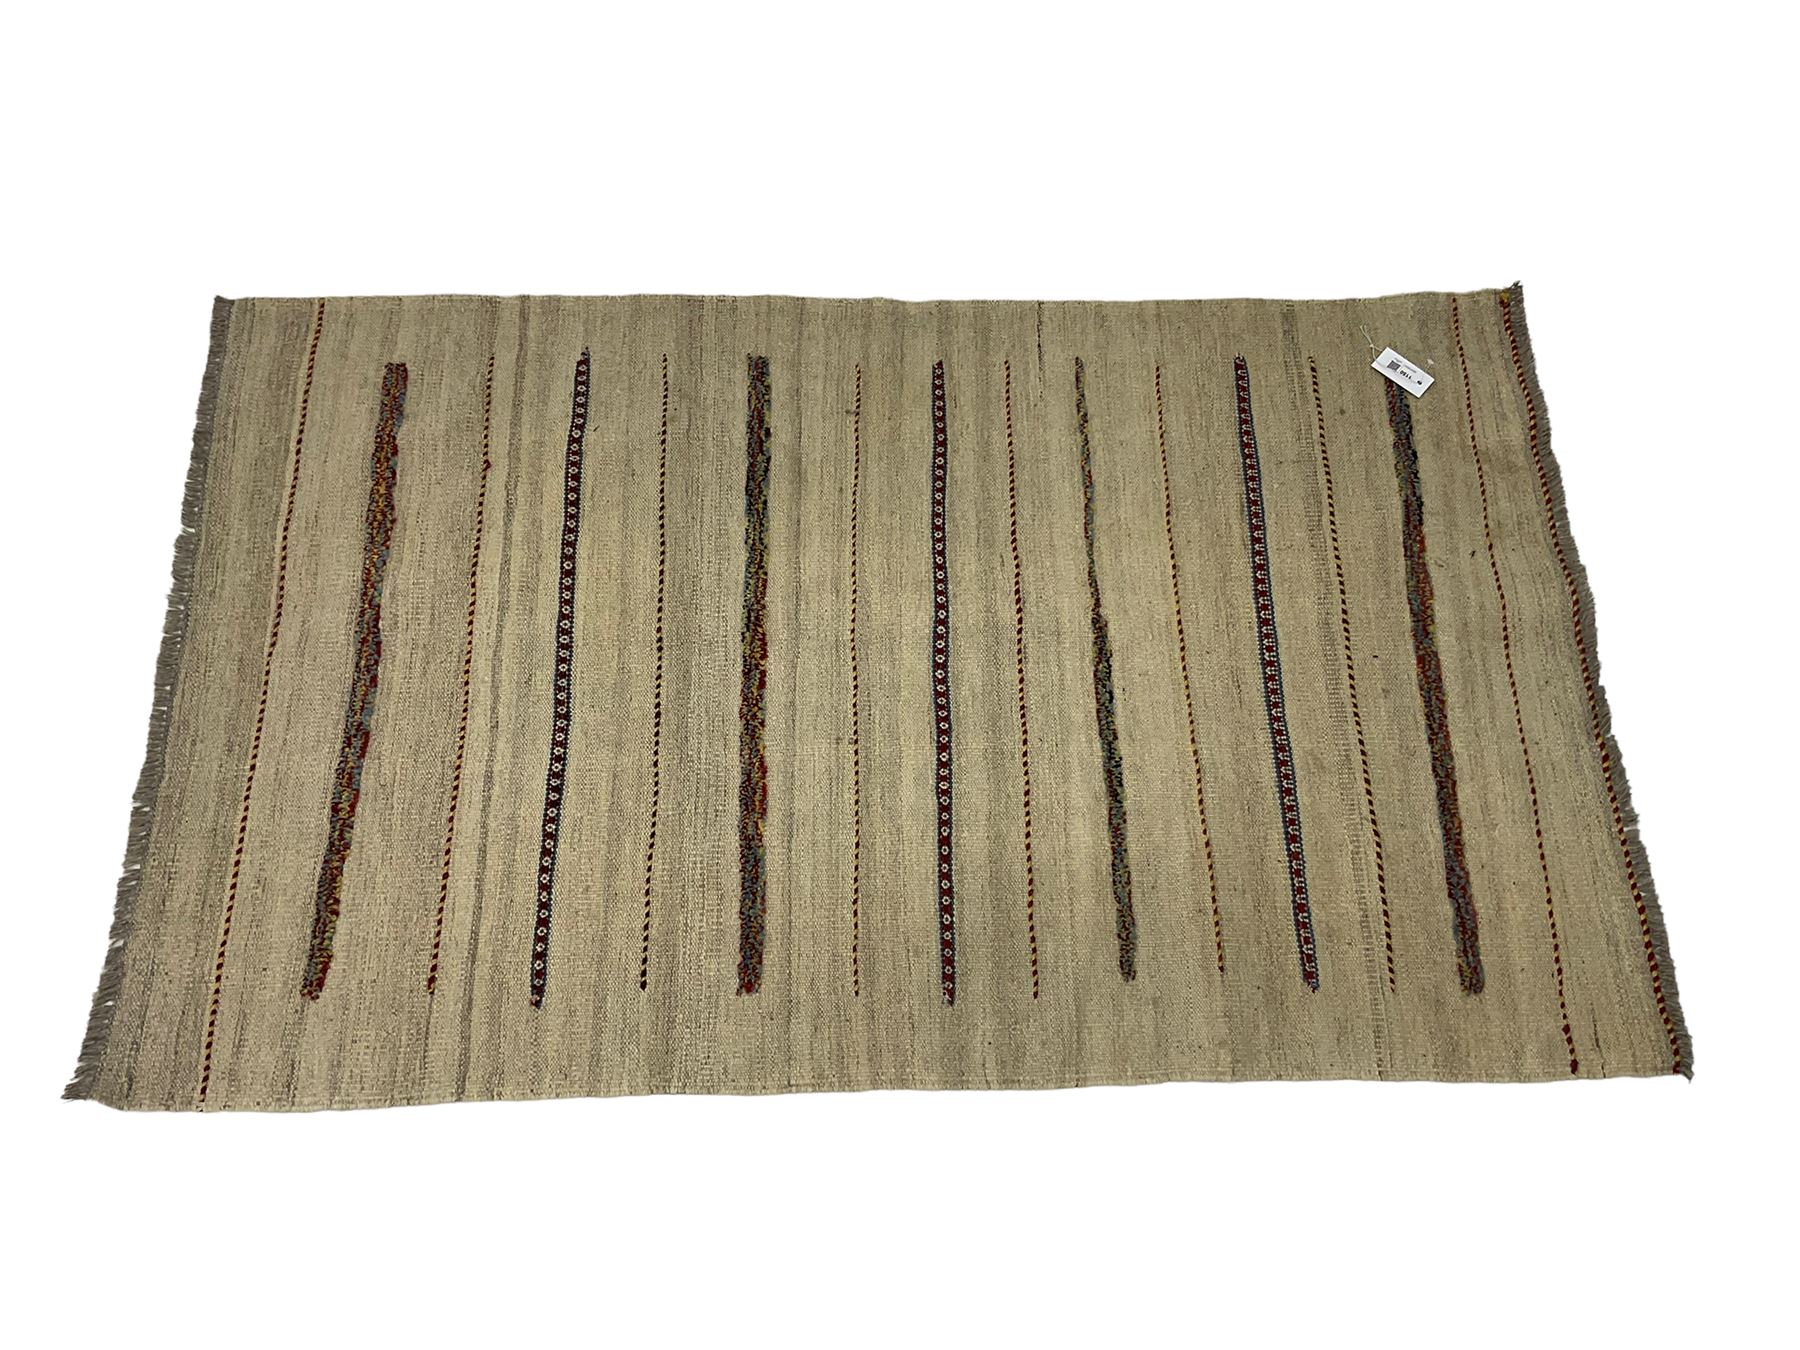 Flat woven rug decorated with patterned bands (160cm x 96cm) - Image 3 of 5